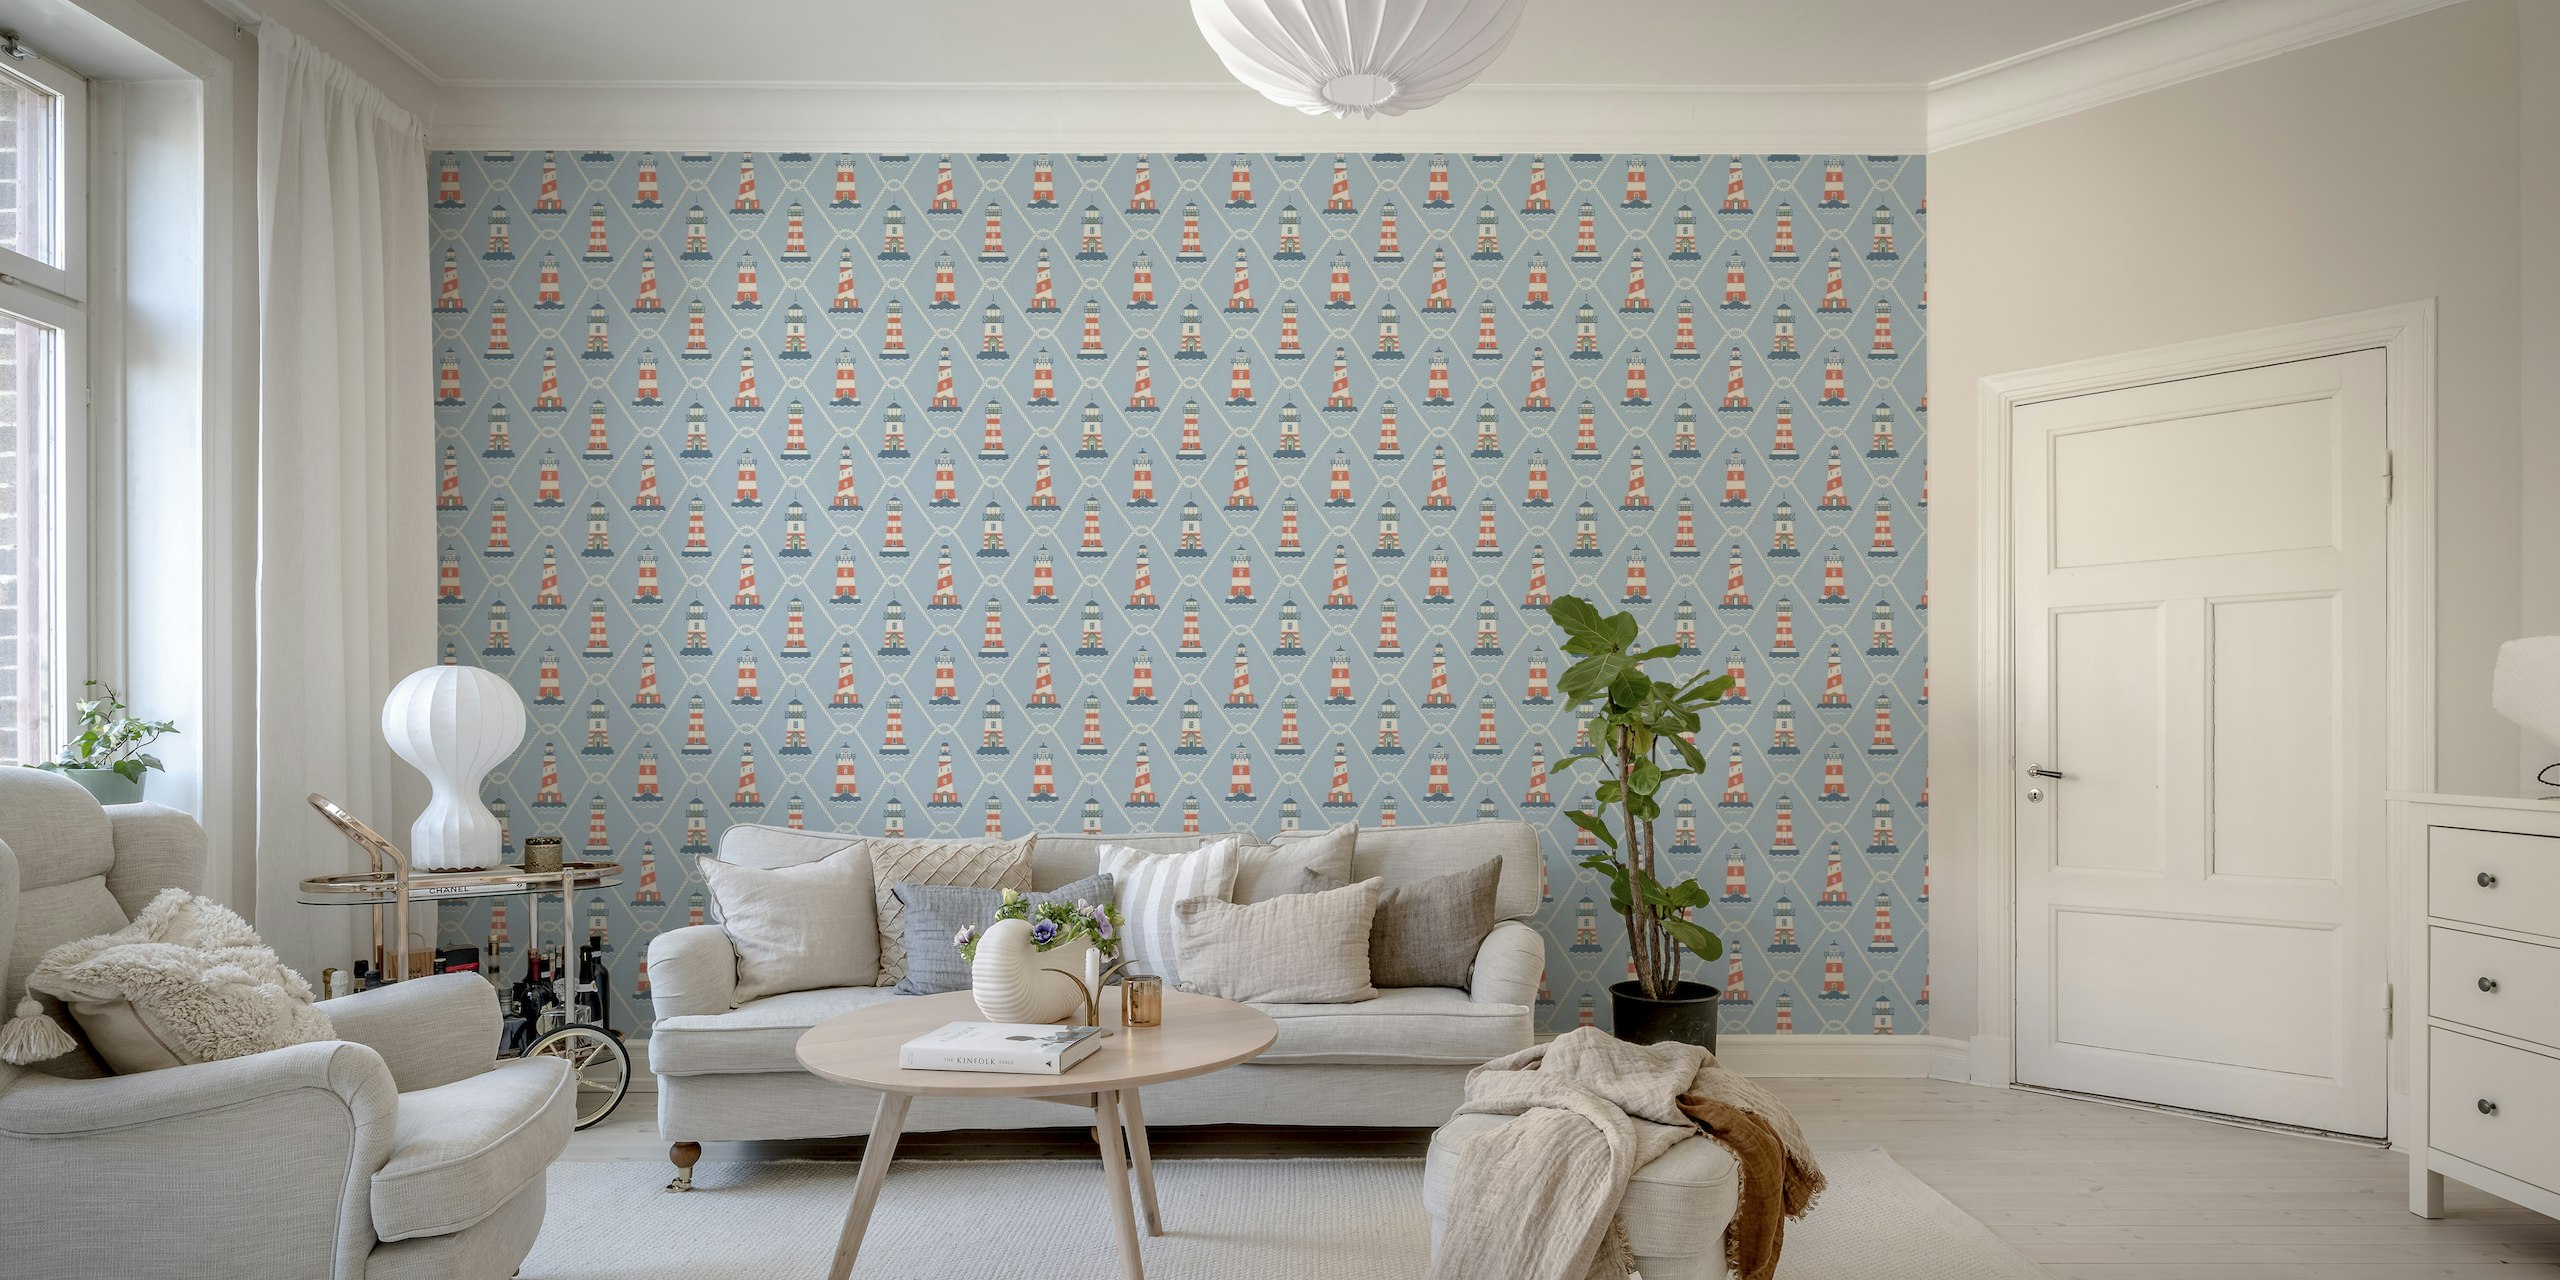 Coastal chic wall mural with gray and blue lighthouses pattern